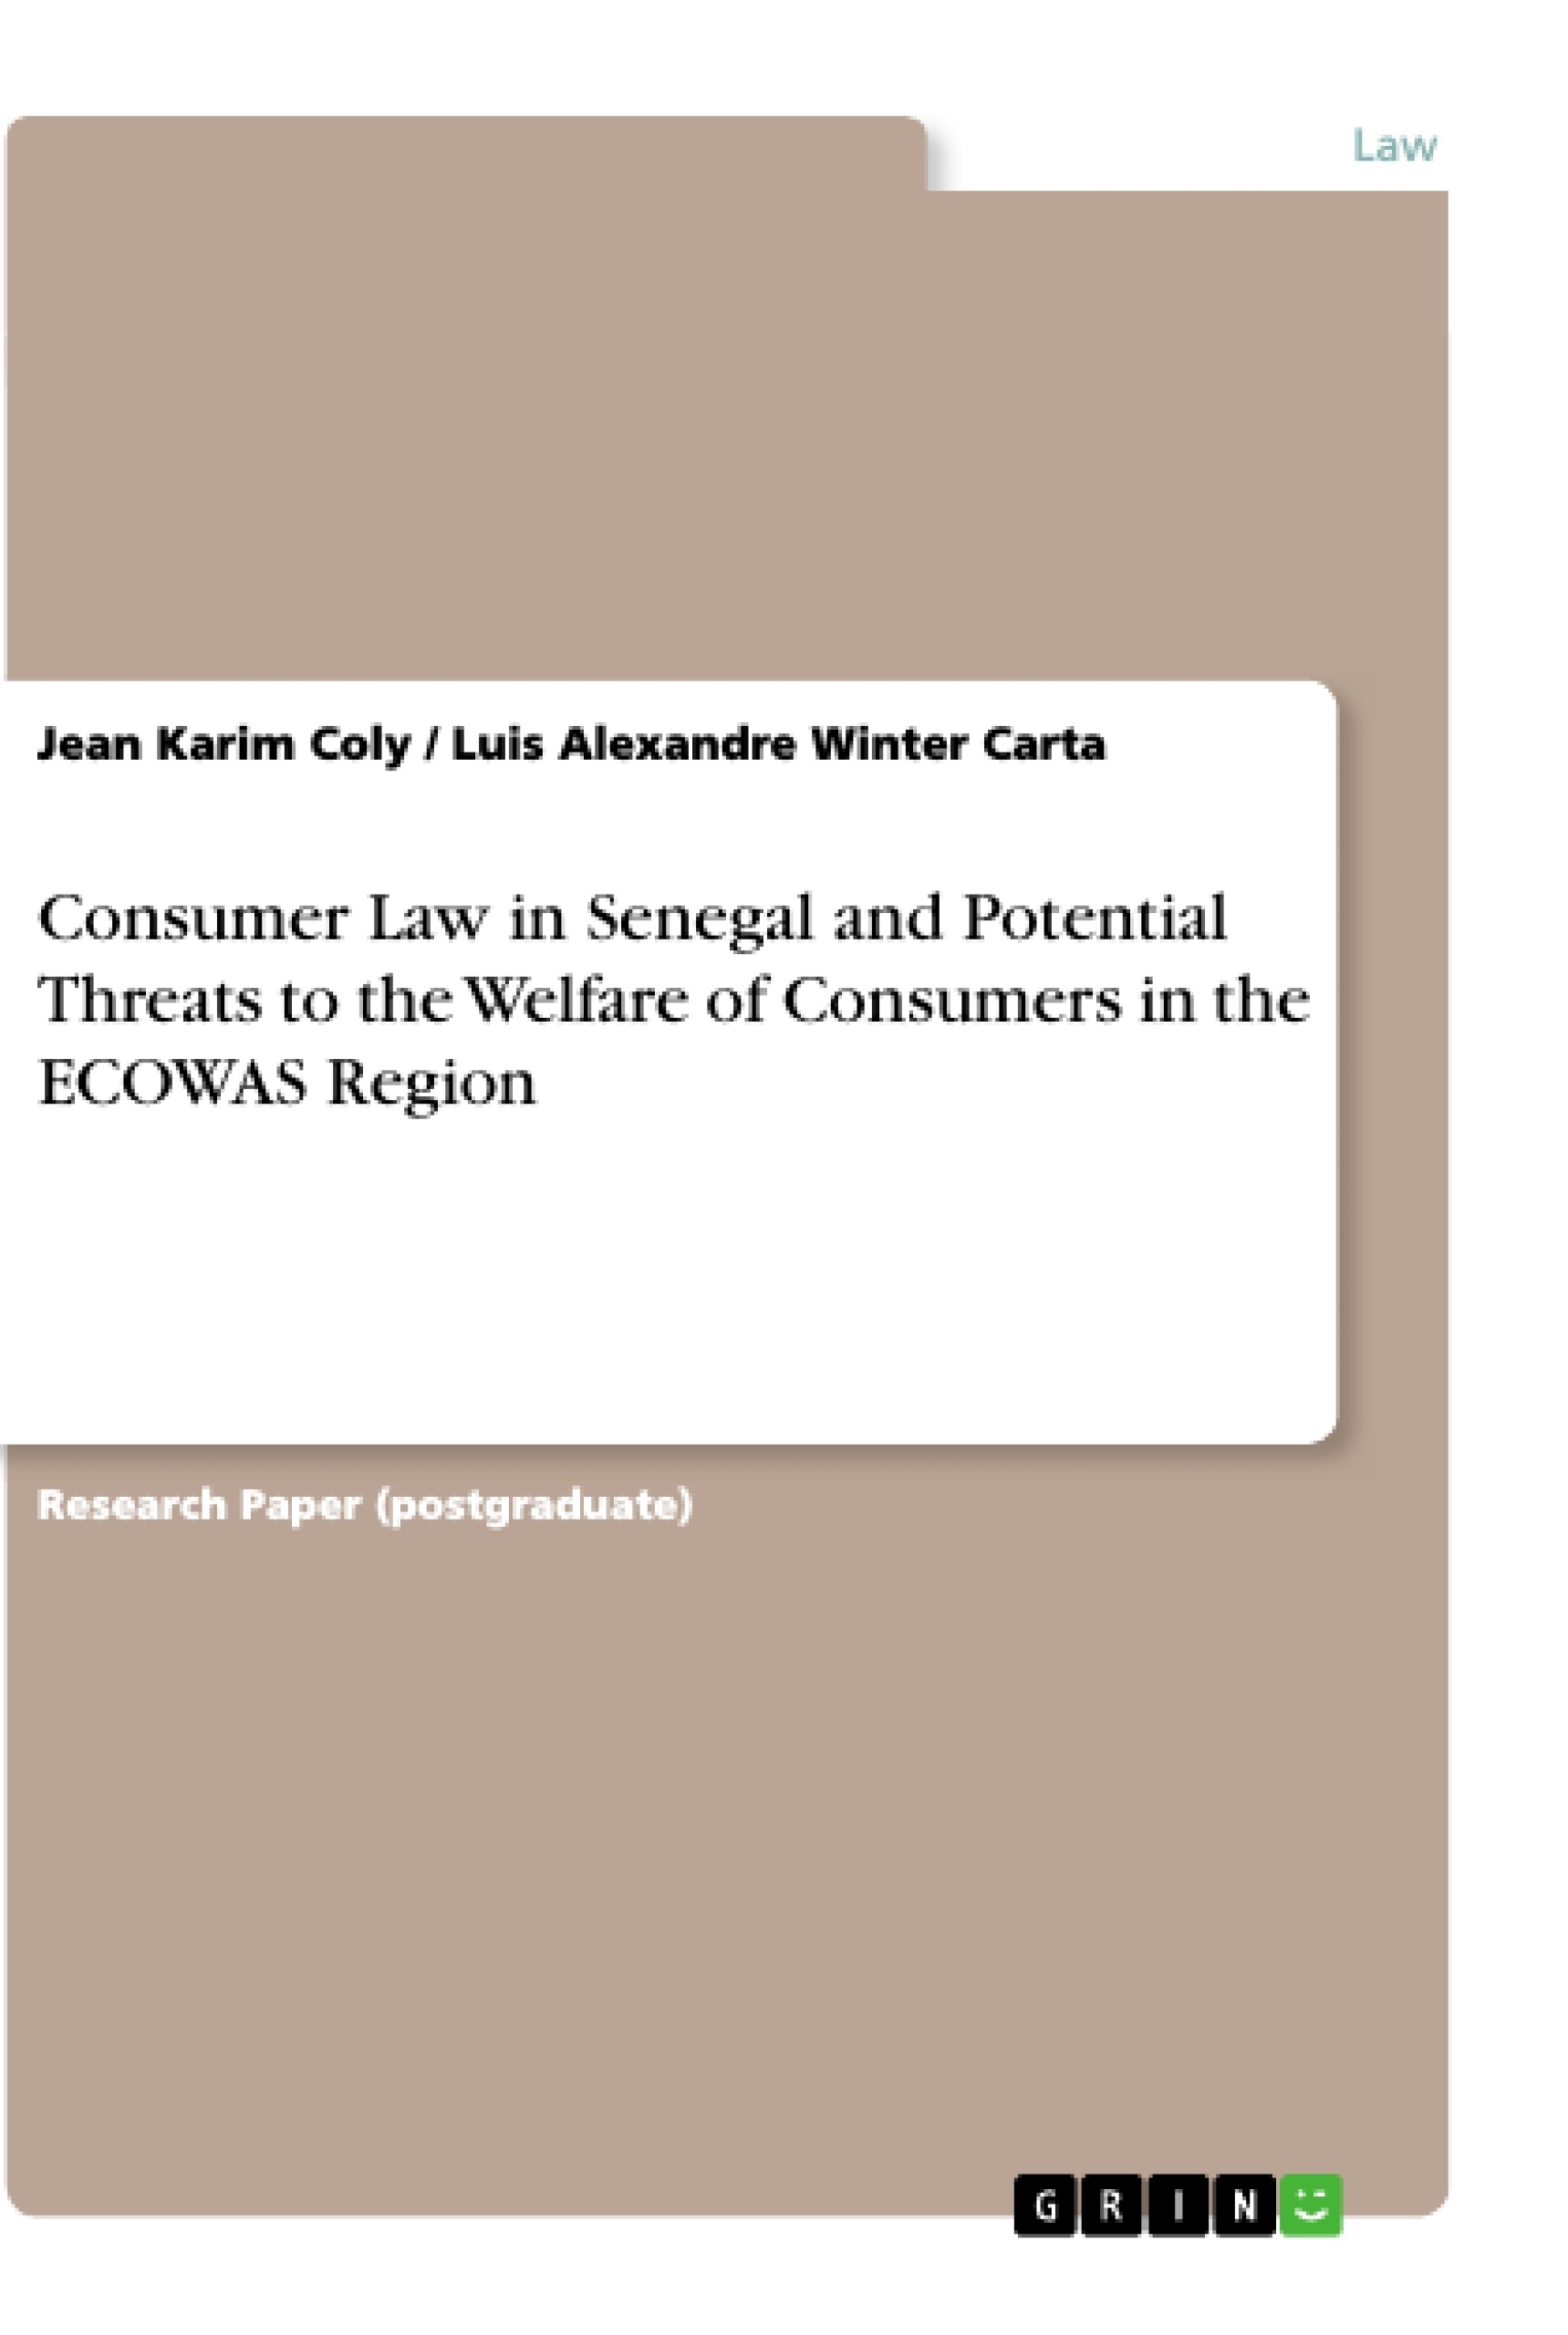 Titel: Consumer Law in Senegal and Potential Threats to the Welfare of Consumers in the ECOWAS Region